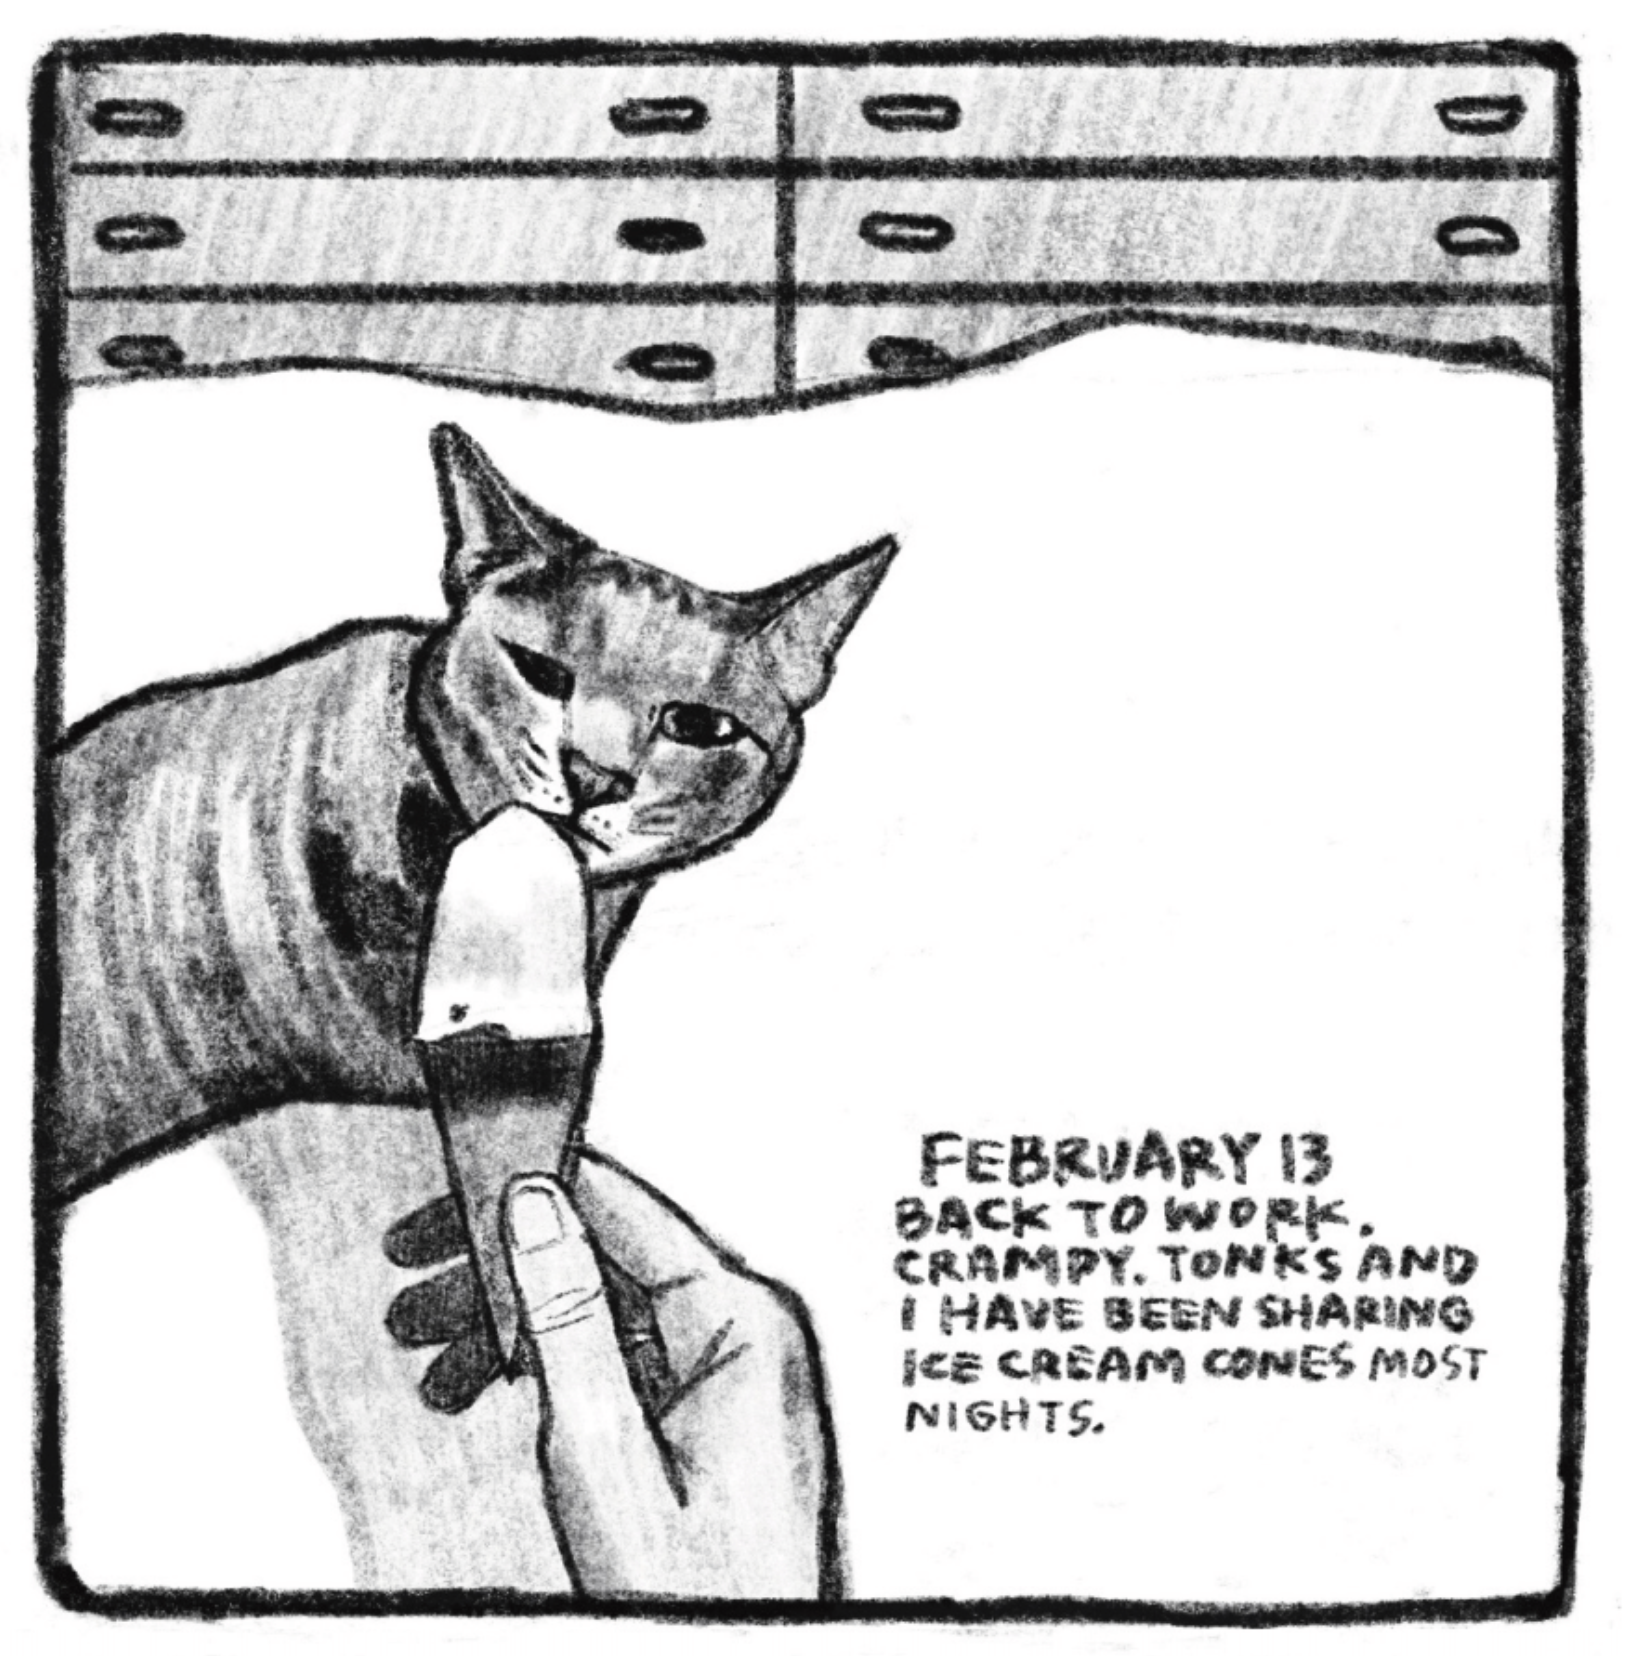 Hold Still Episode 8, Panel 3
"FEBRUARY 13
BACK TO WORK. CRAMPY. TONKS AND I HAVE BEEN SHARING ICE CREAM CONES MOST NIGHTS."
Drawing of a hand holding an ice cream cone up to a cat, who leans in